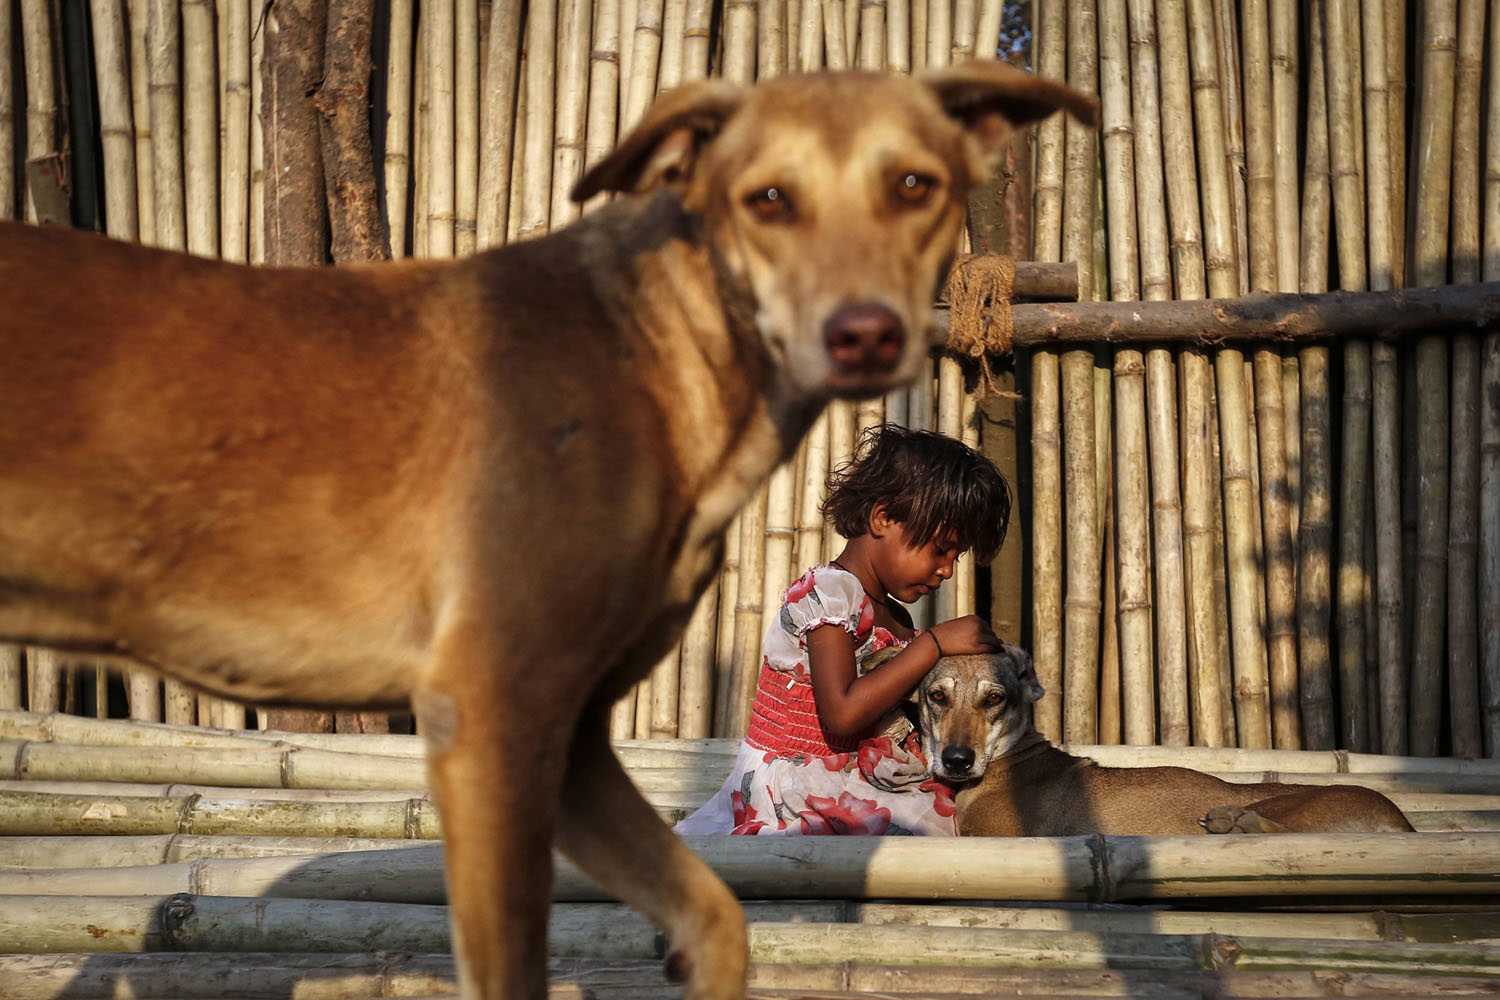 Shazia, a six year-old-girl, plays with street dogs on bamboo sticks at a timber market in Mumbai